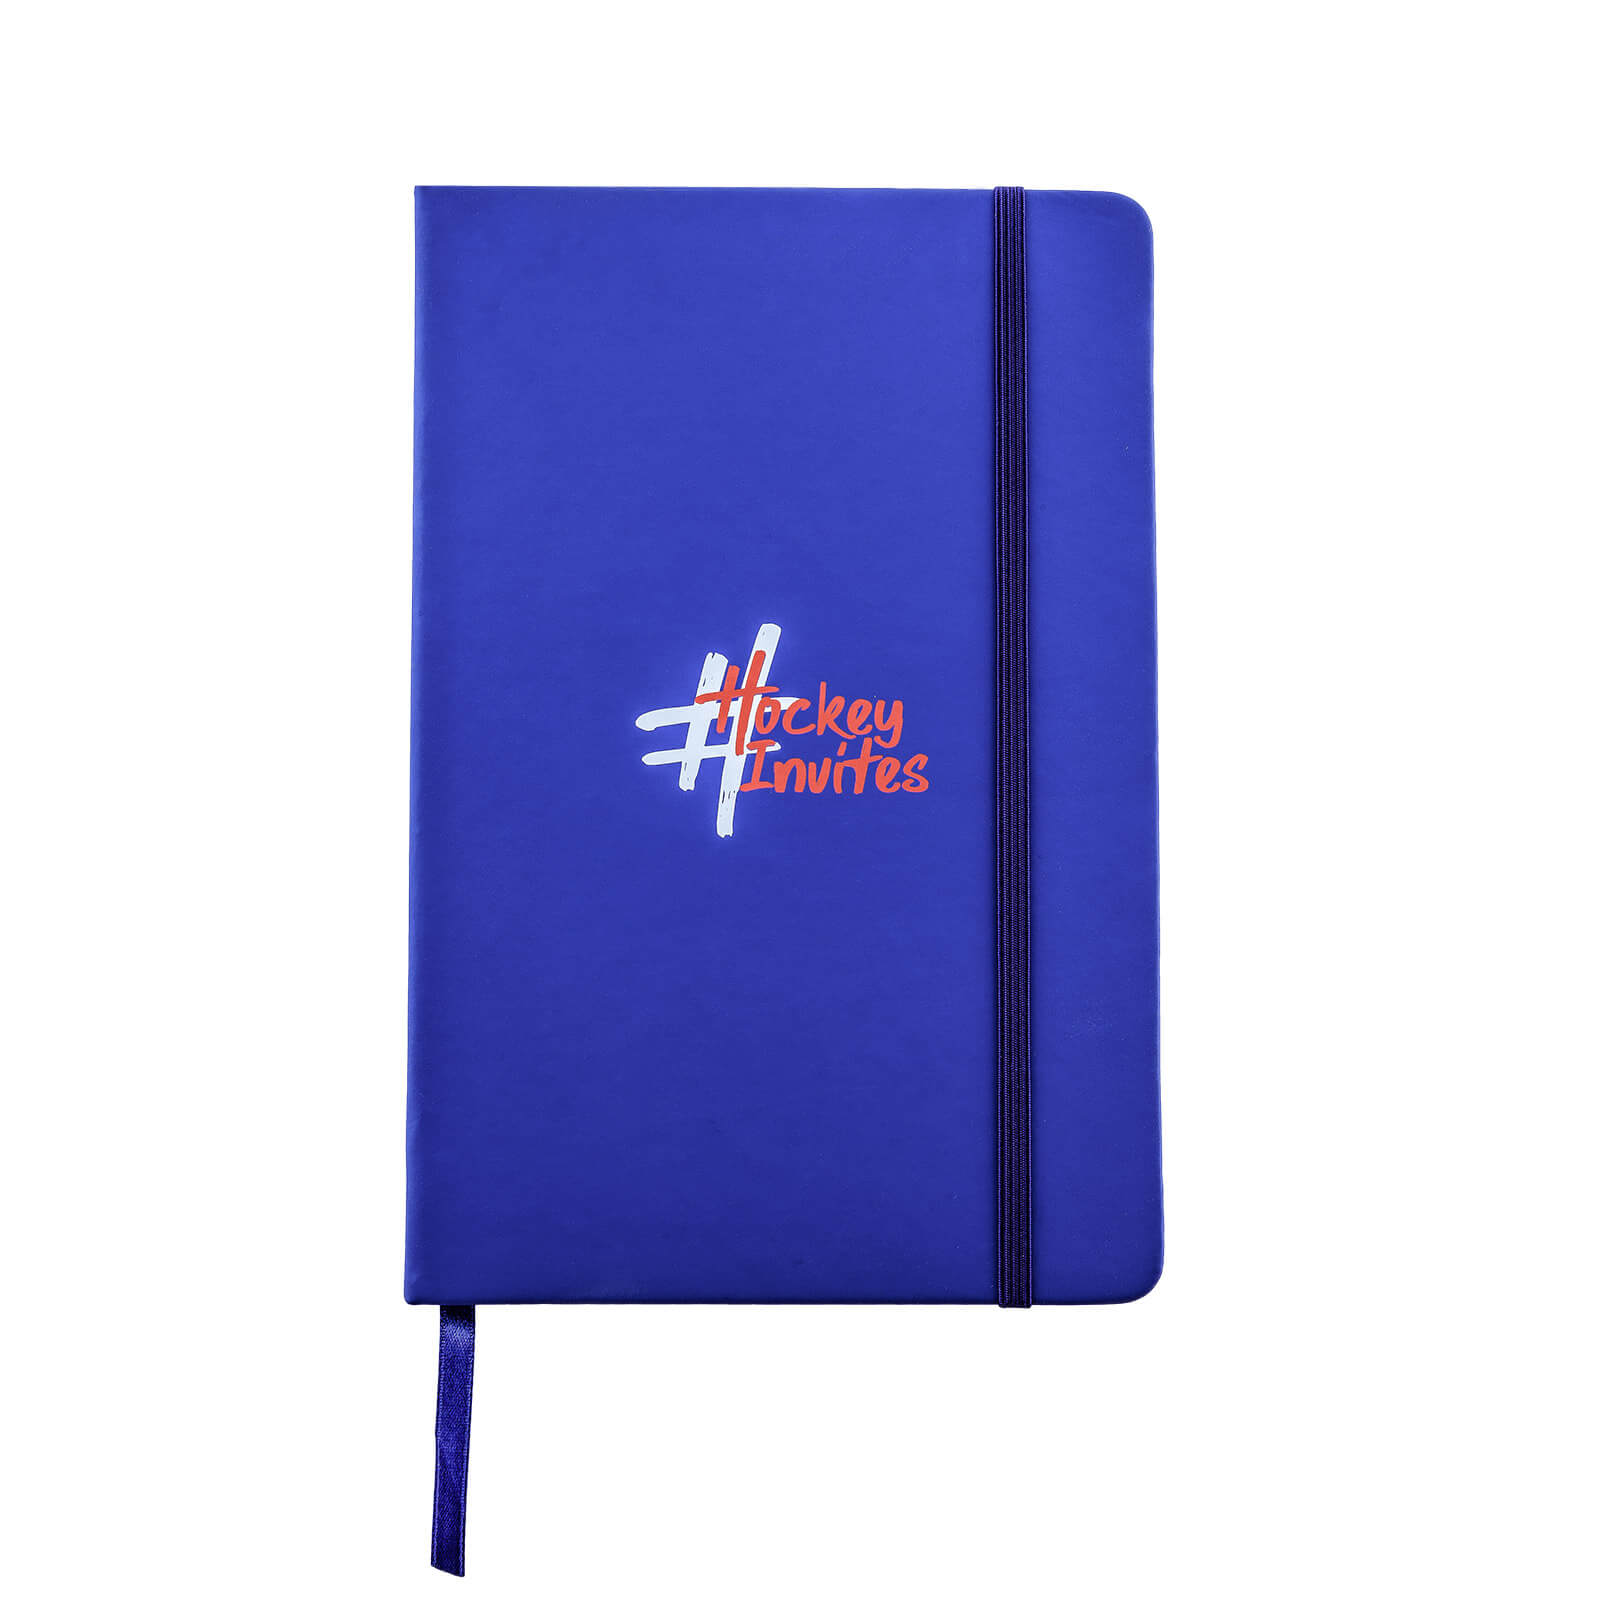 Notebook, lined, 96 pages, 14 × 21 cm - Motive Hockey invites